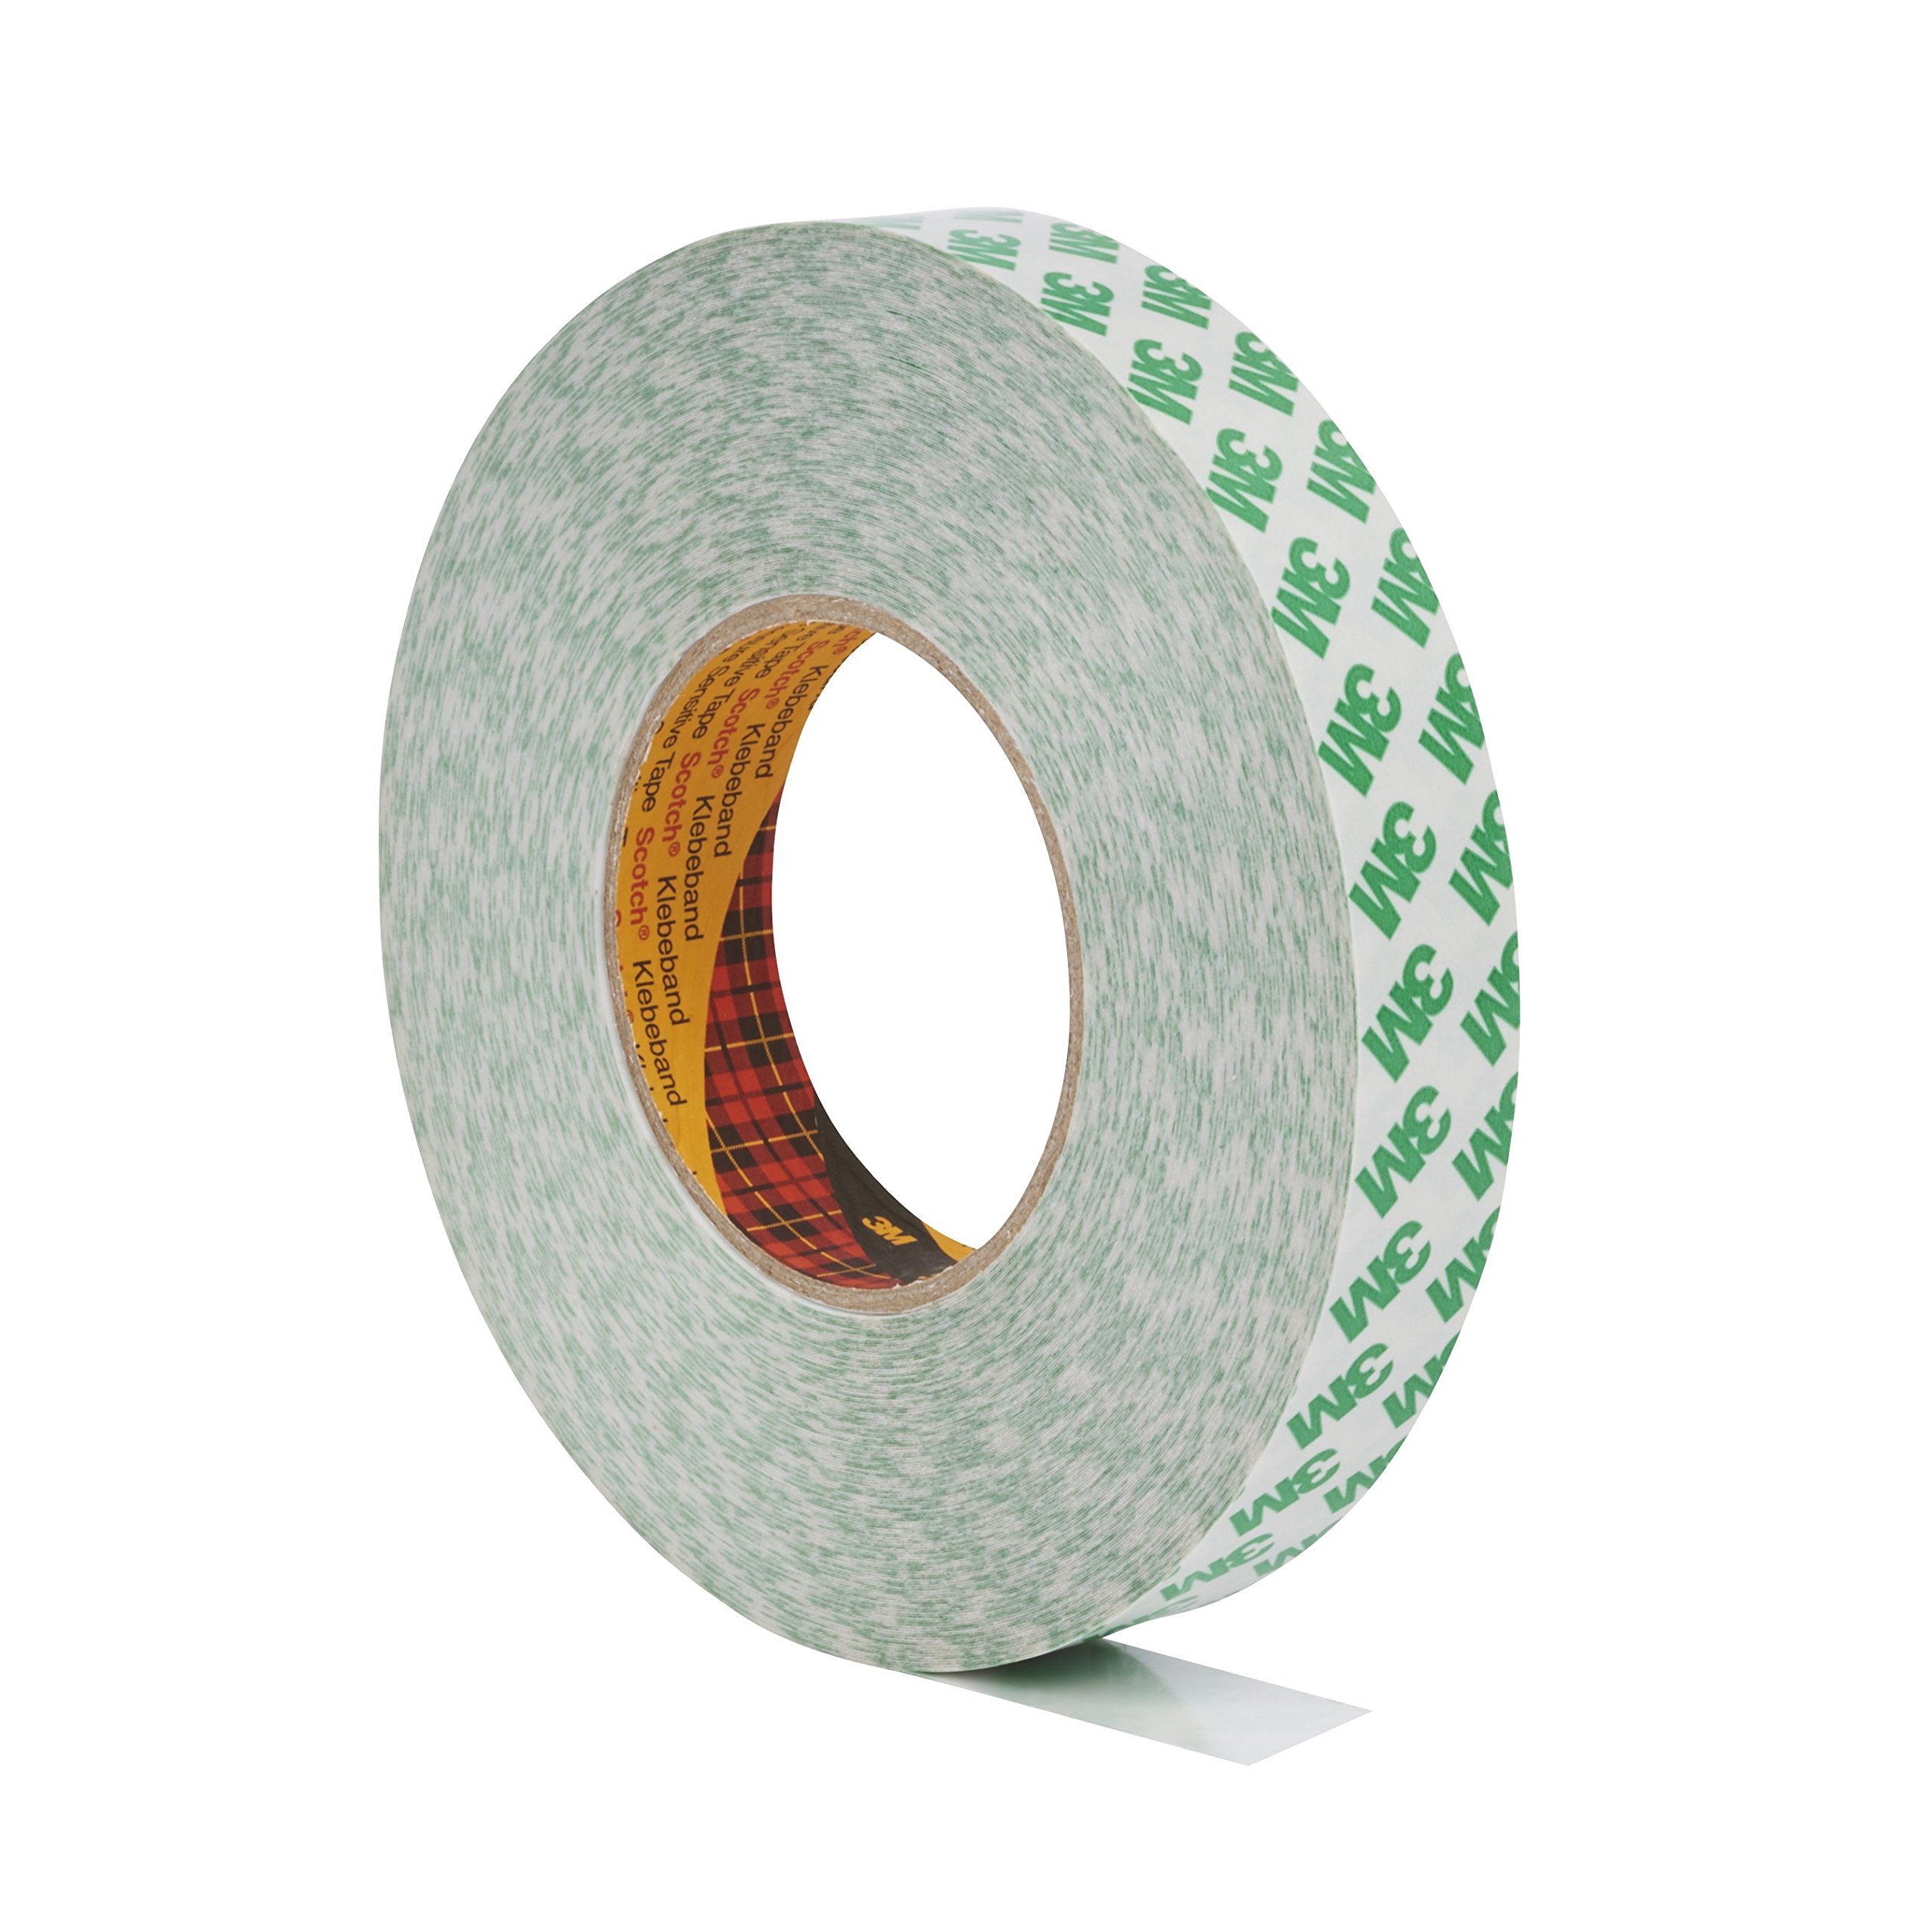 3M™ 9087 Double Coated Tape 19mm x 50m